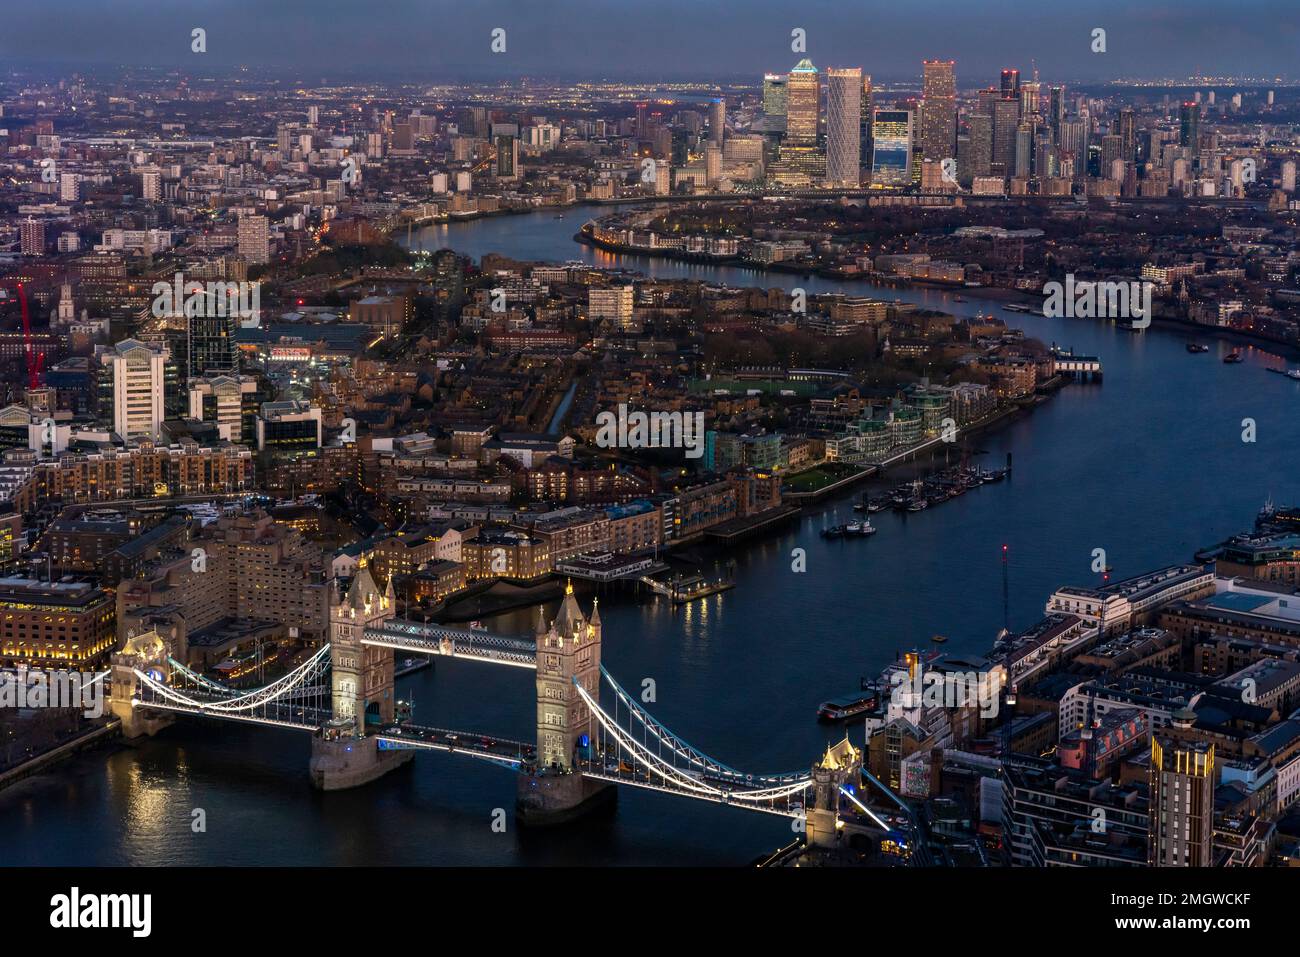 A View Of Tower Bridge, The River Thames and Canary Wharf at Night from The Shard, London, UK. Stock Photo